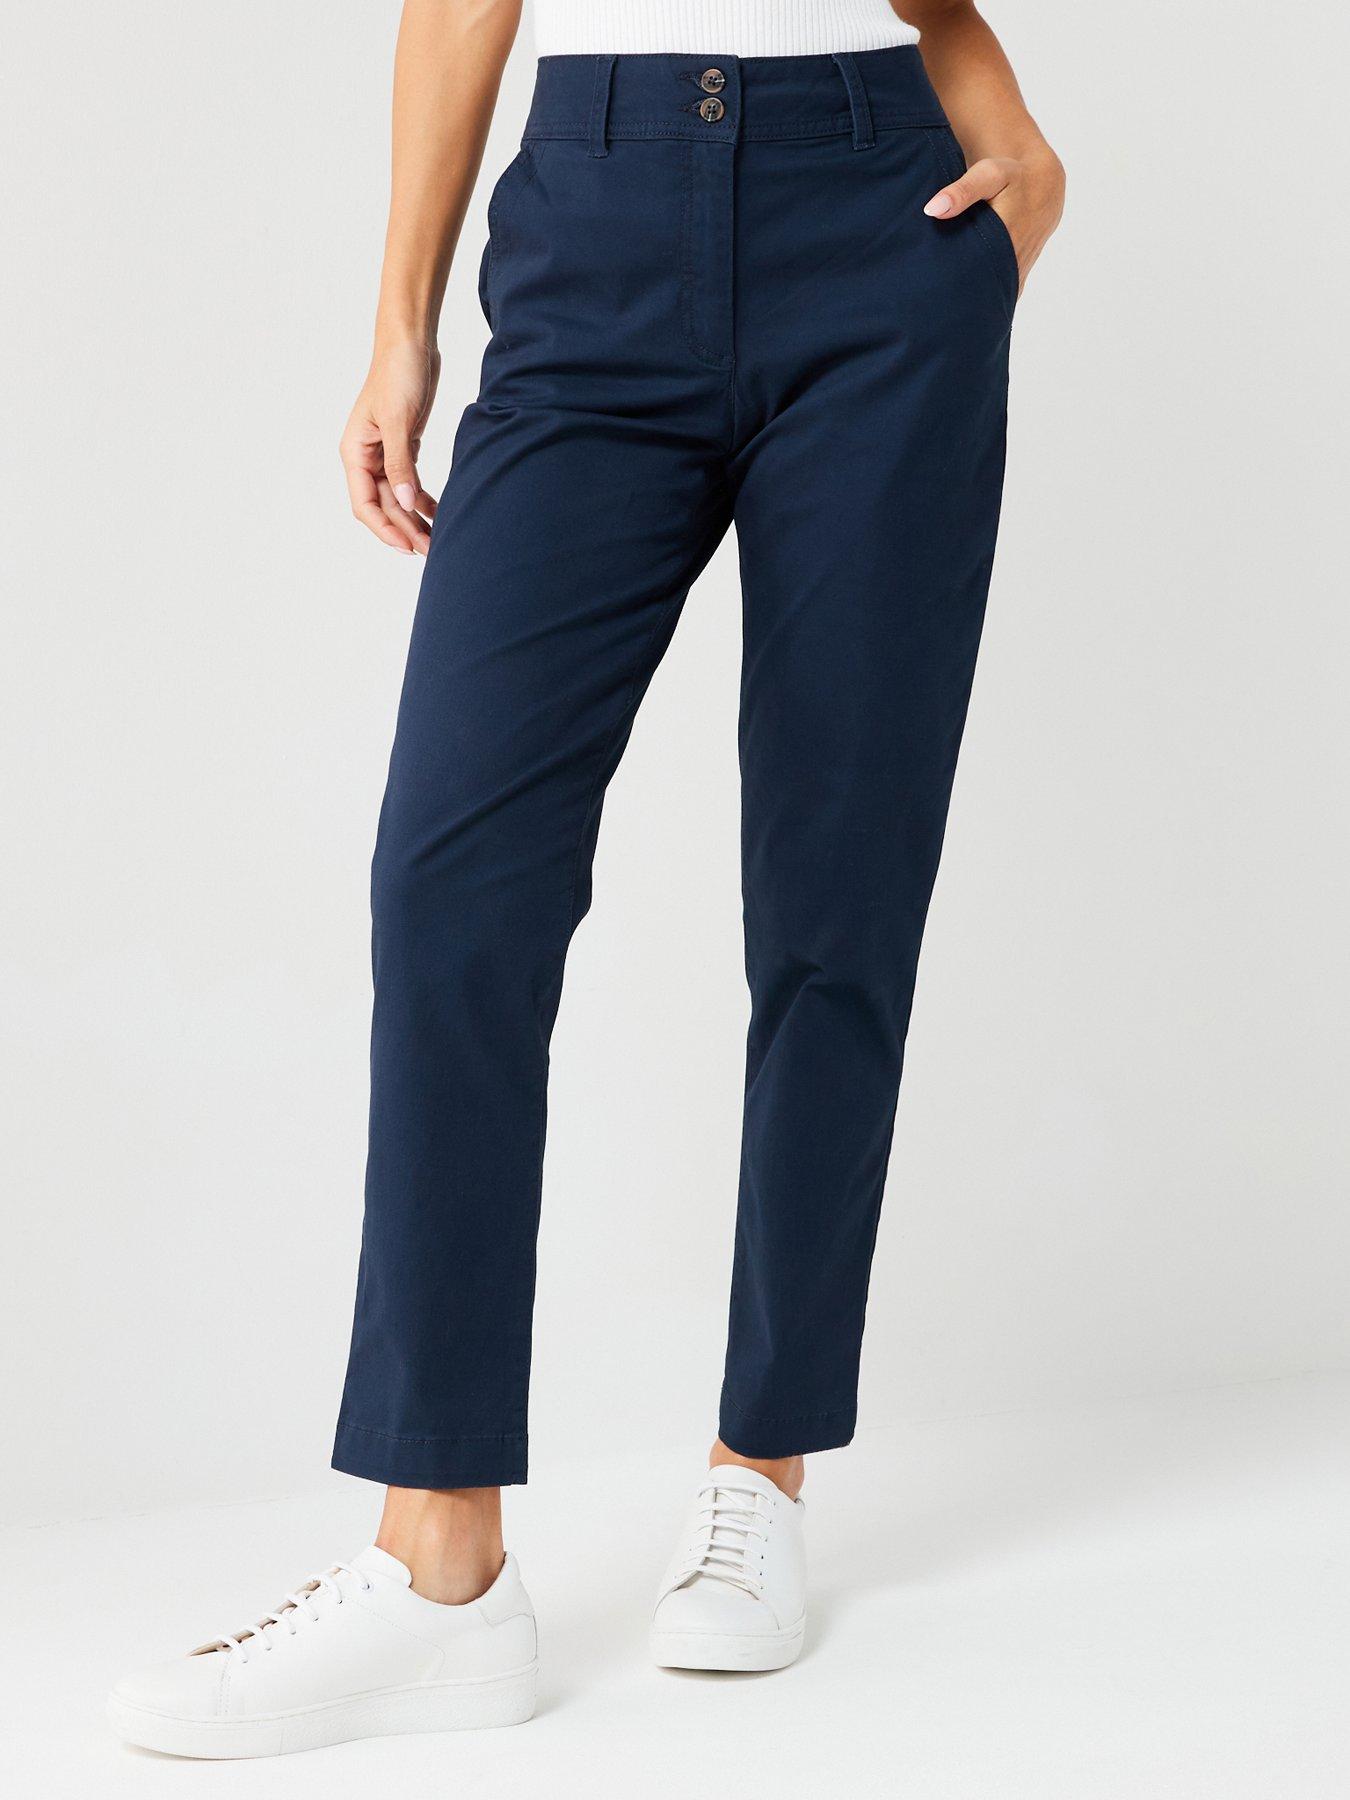 Tummy-slimmer Trousers